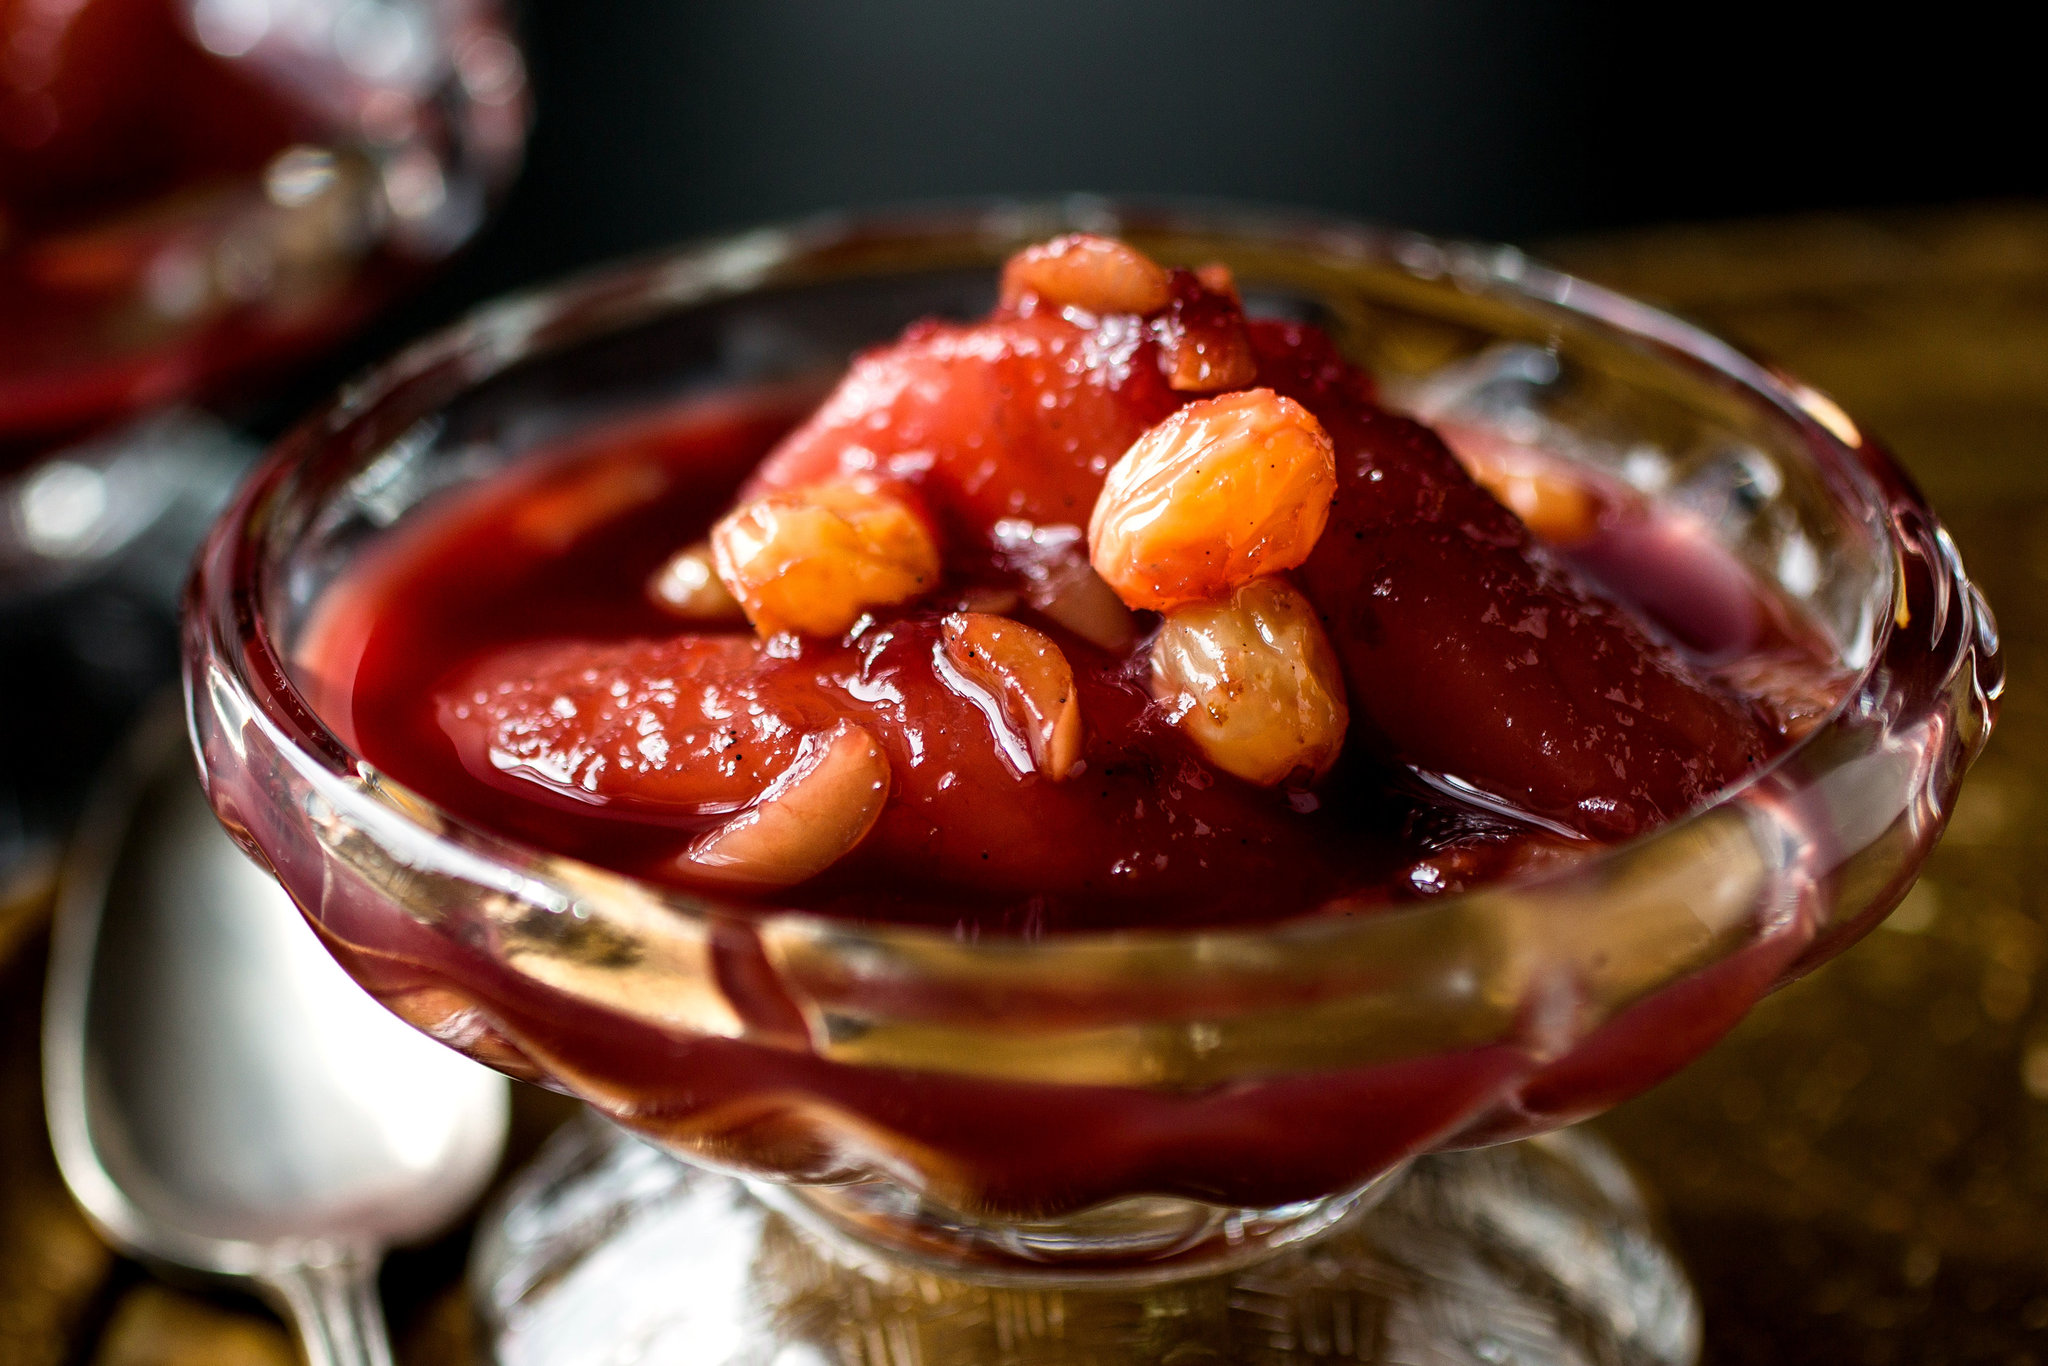 Porject Fairytale: Poached Pears in Red Wineand Cassis